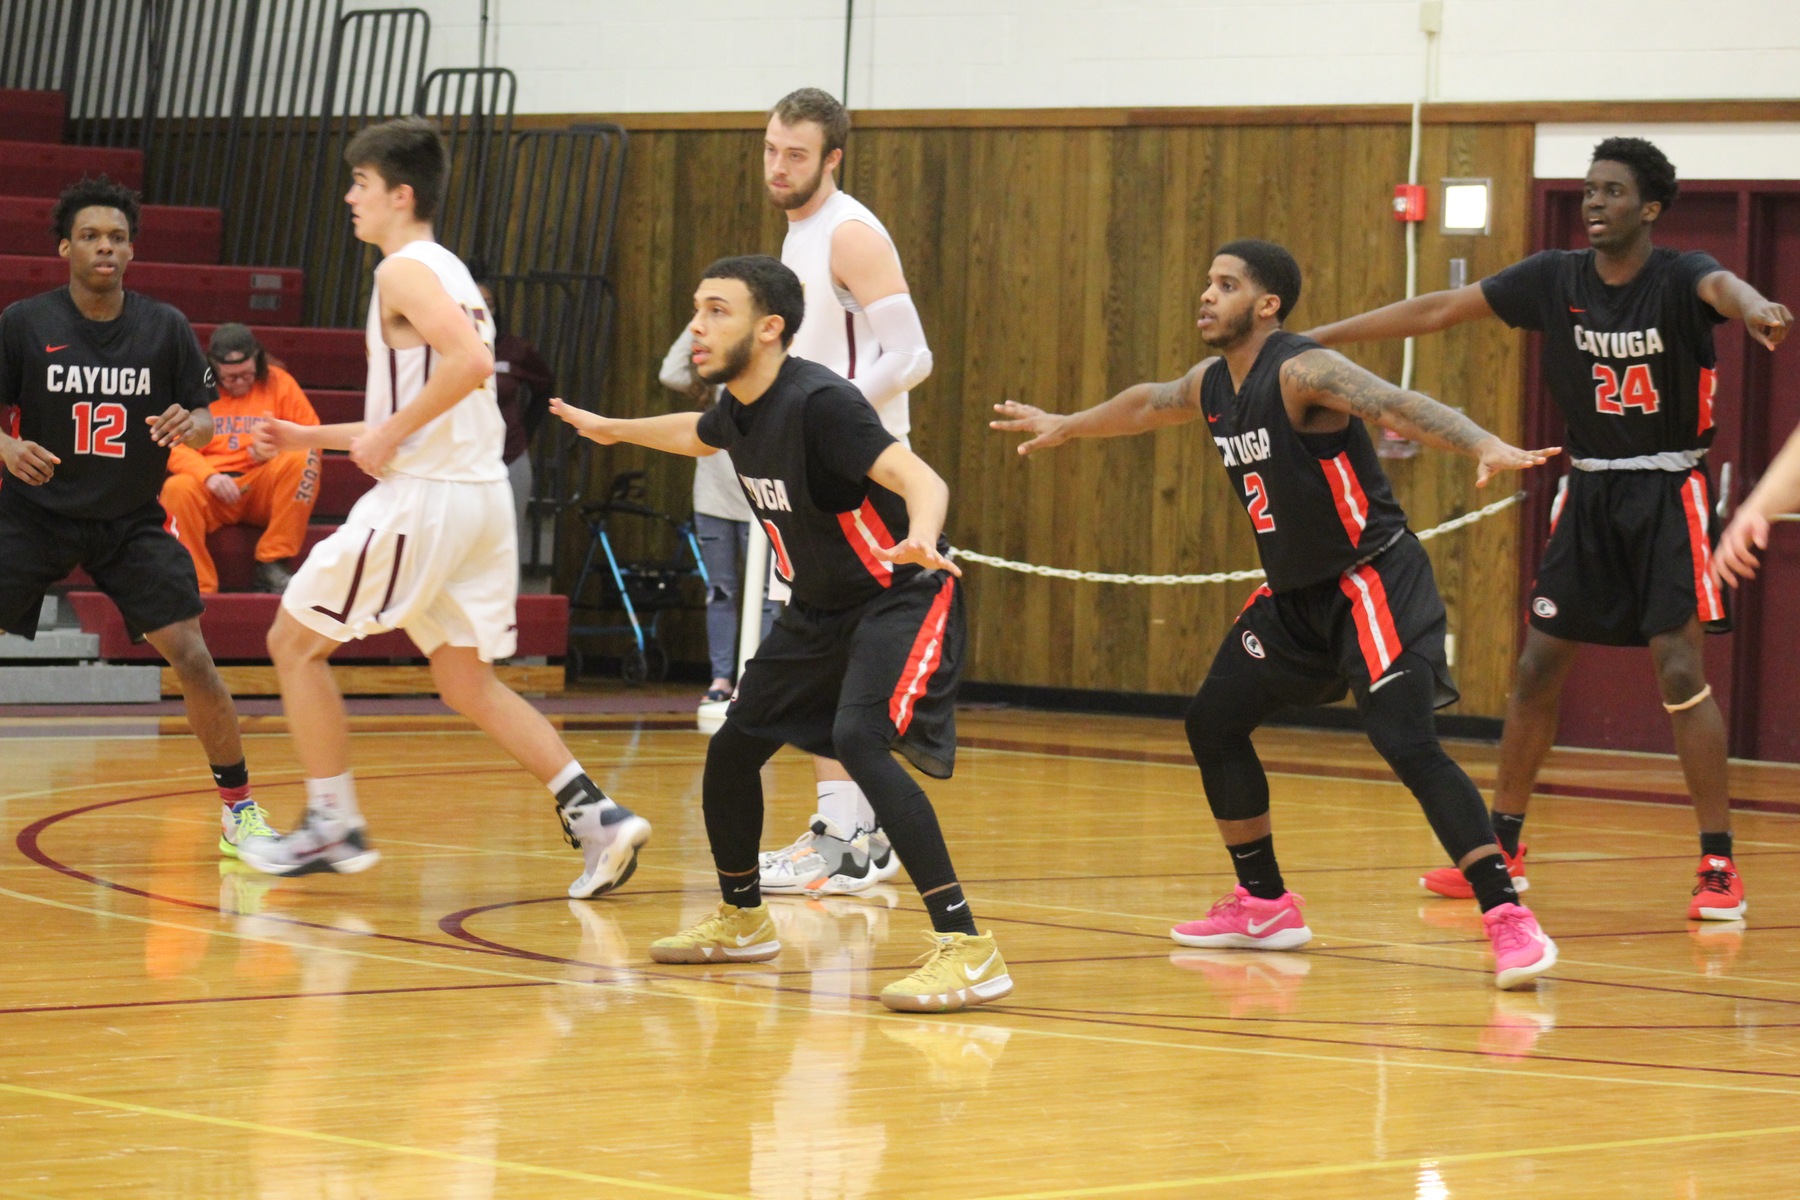 The Spartans lost in the first round of the Region III playoffs 92-67 on Saturday to Jefferson Community College.